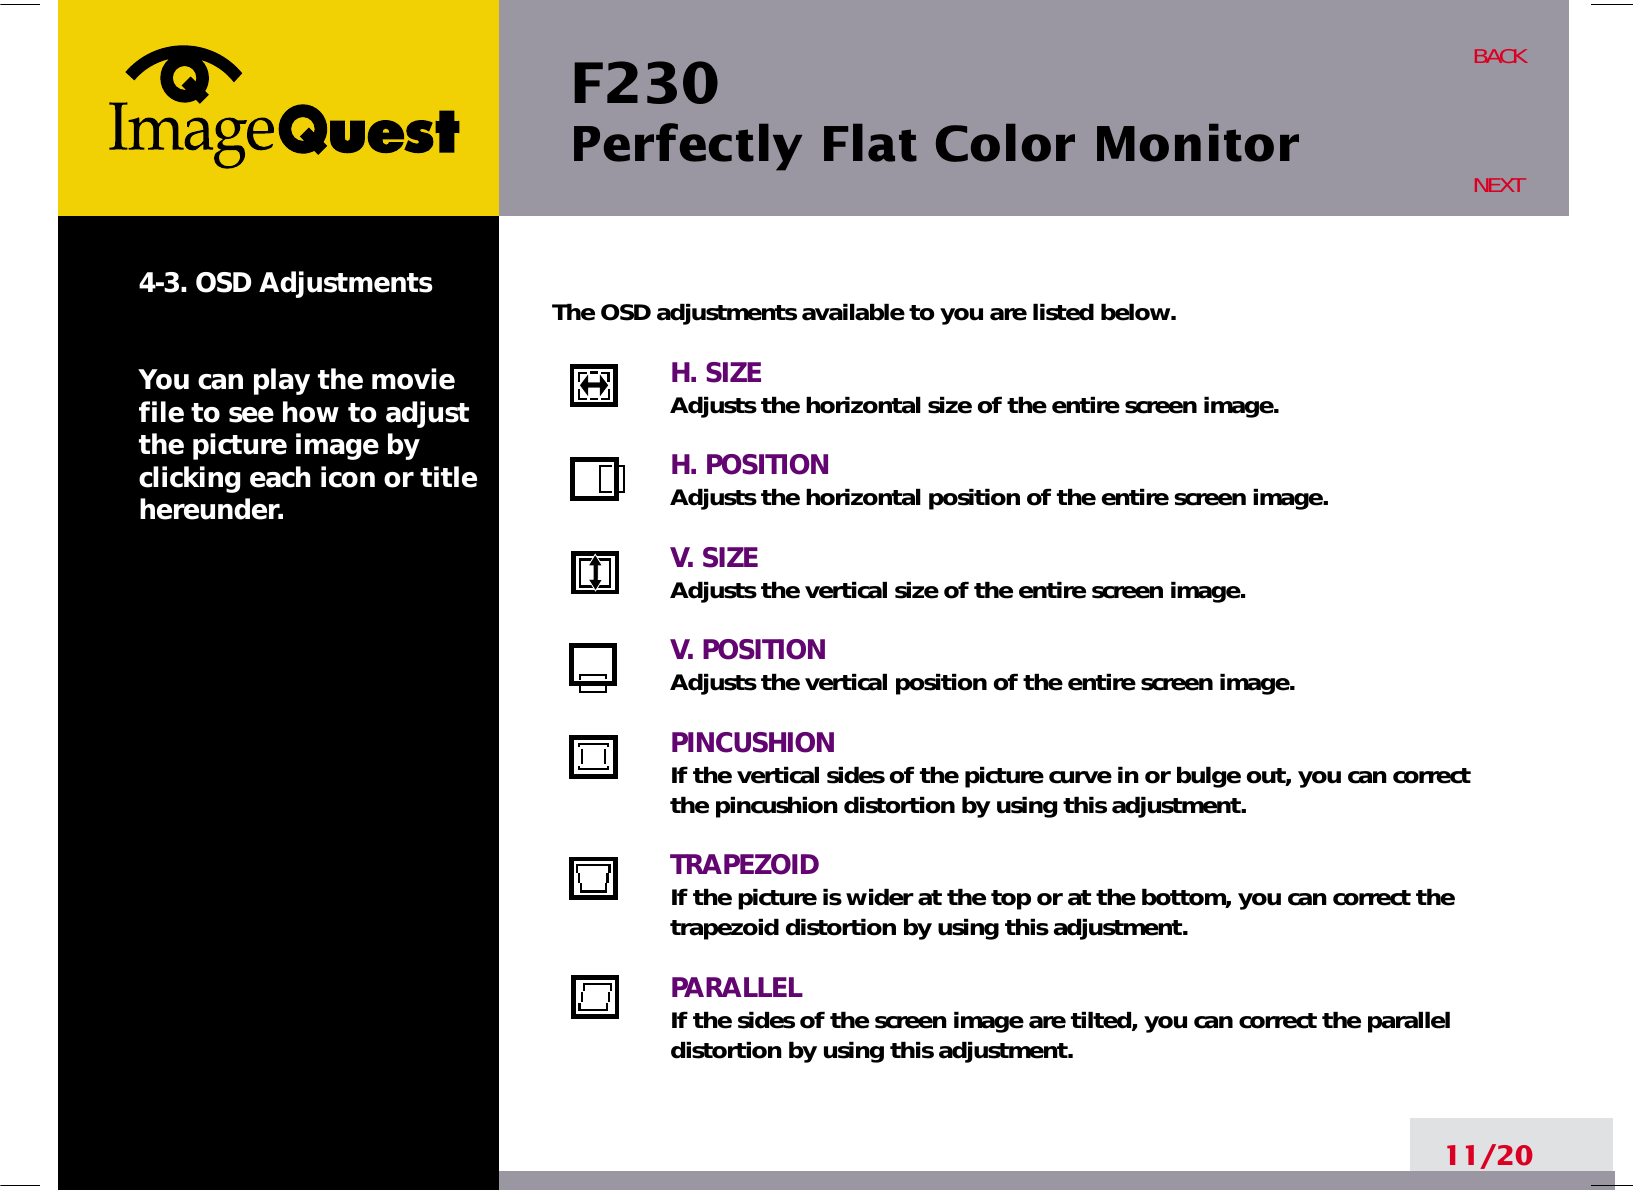 F230 Perfectly Flat Color Monitor11/20BACKNEXT4-3. OSD AdjustmentsYou can play the moviefile to see how to adjustthe picture image byclicking each icon or titlehereunder.The OSD adjustments available to you are listed below.H. SIZEAdjusts the horizontal size of the entire screen image.H. POSITIONAdjusts the horizontal position of the entire screen image.V. SIZEAdjusts the vertical size of the entire screen image.V. POSITIONAdjusts the vertical position of the entire screen image.PINCUSHIONIf the vertical sides of the picture curve in or bulge out, you can correctthe pincushion distortion by using this adjustment.TRAPEZOIDIf the picture is wider at the top or at the bottom, you can correct thetrapezoid distortion by using this adjustment.PARALLELIf the sides of the screen image are tilted, you can correct the paralleldistortion by using this adjustment.